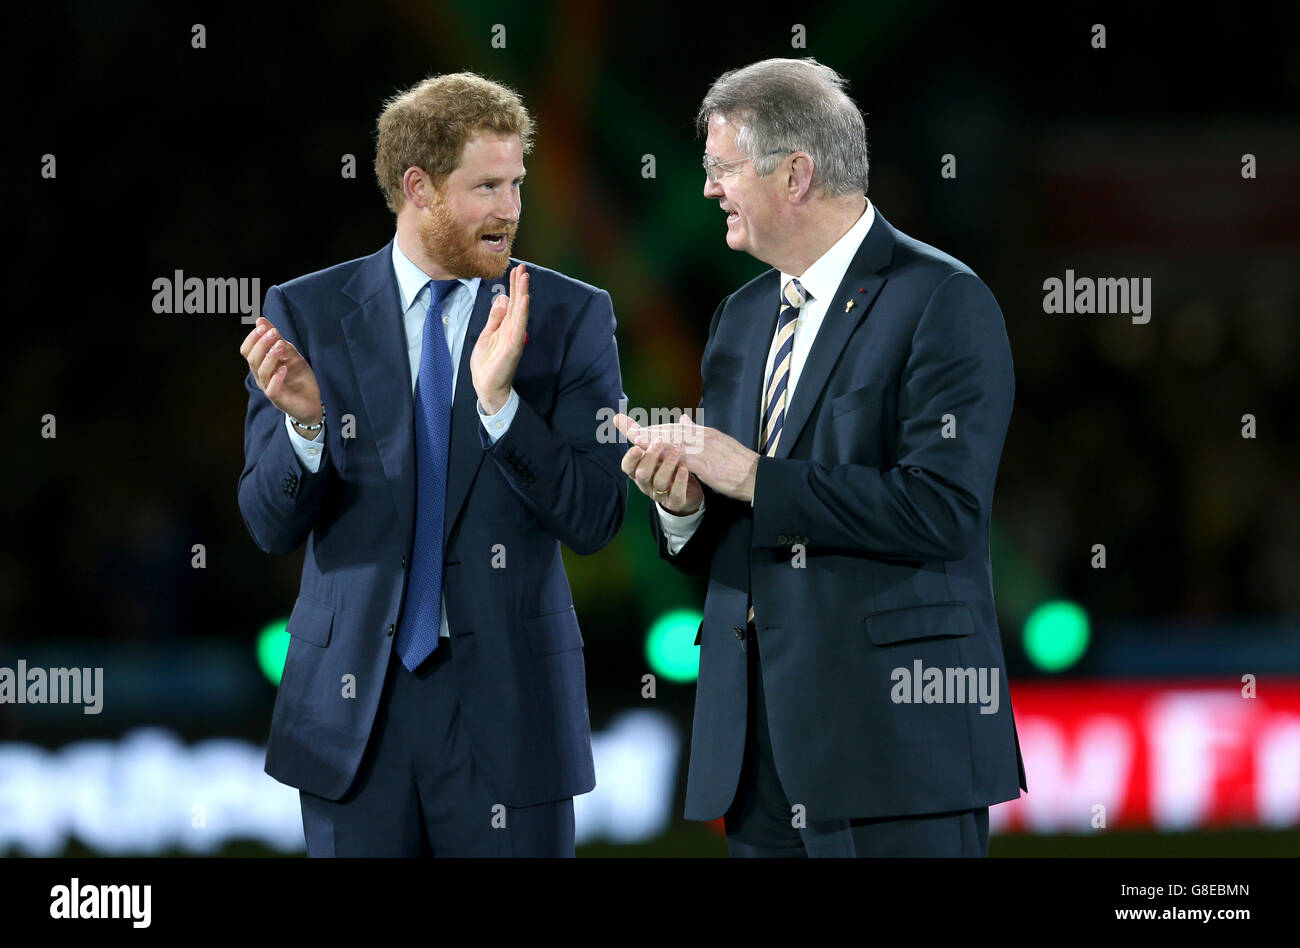 Prince Harry (left) chats with World Rugby chairman Bernard Lapasset after the Rugby World Cup Final at Twickenham, London. Stock Photo